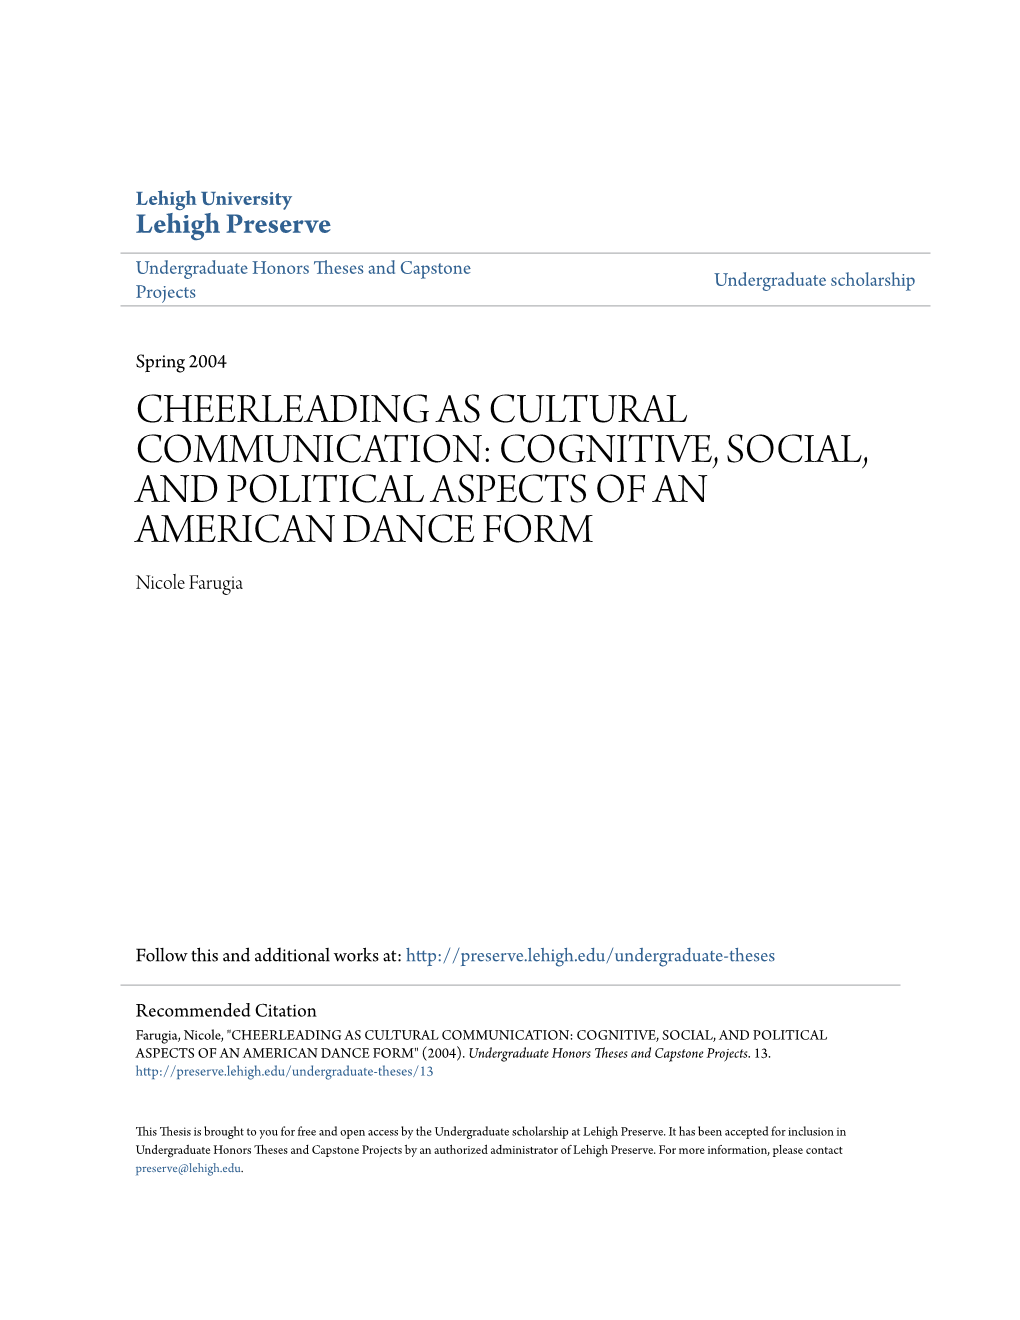 CHEERLEADING AS CULTURAL COMMUNICATION: COGNITIVE, SOCIAL, and POLITICAL ASPECTS of an AMERICAN DANCE FORM Nicole Farugia